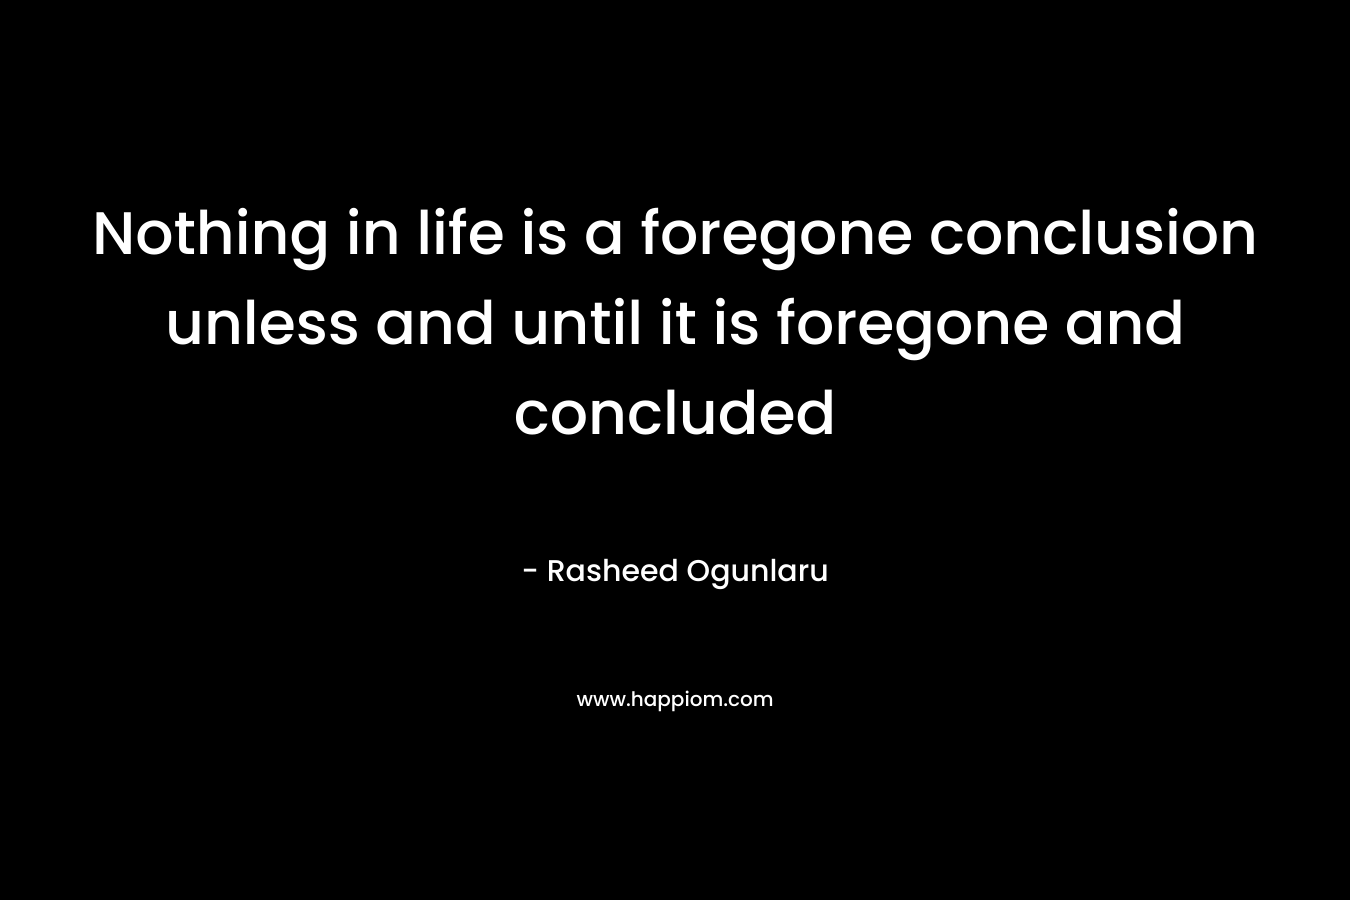 Nothing in life is a foregone conclusion unless and until it is foregone and concluded